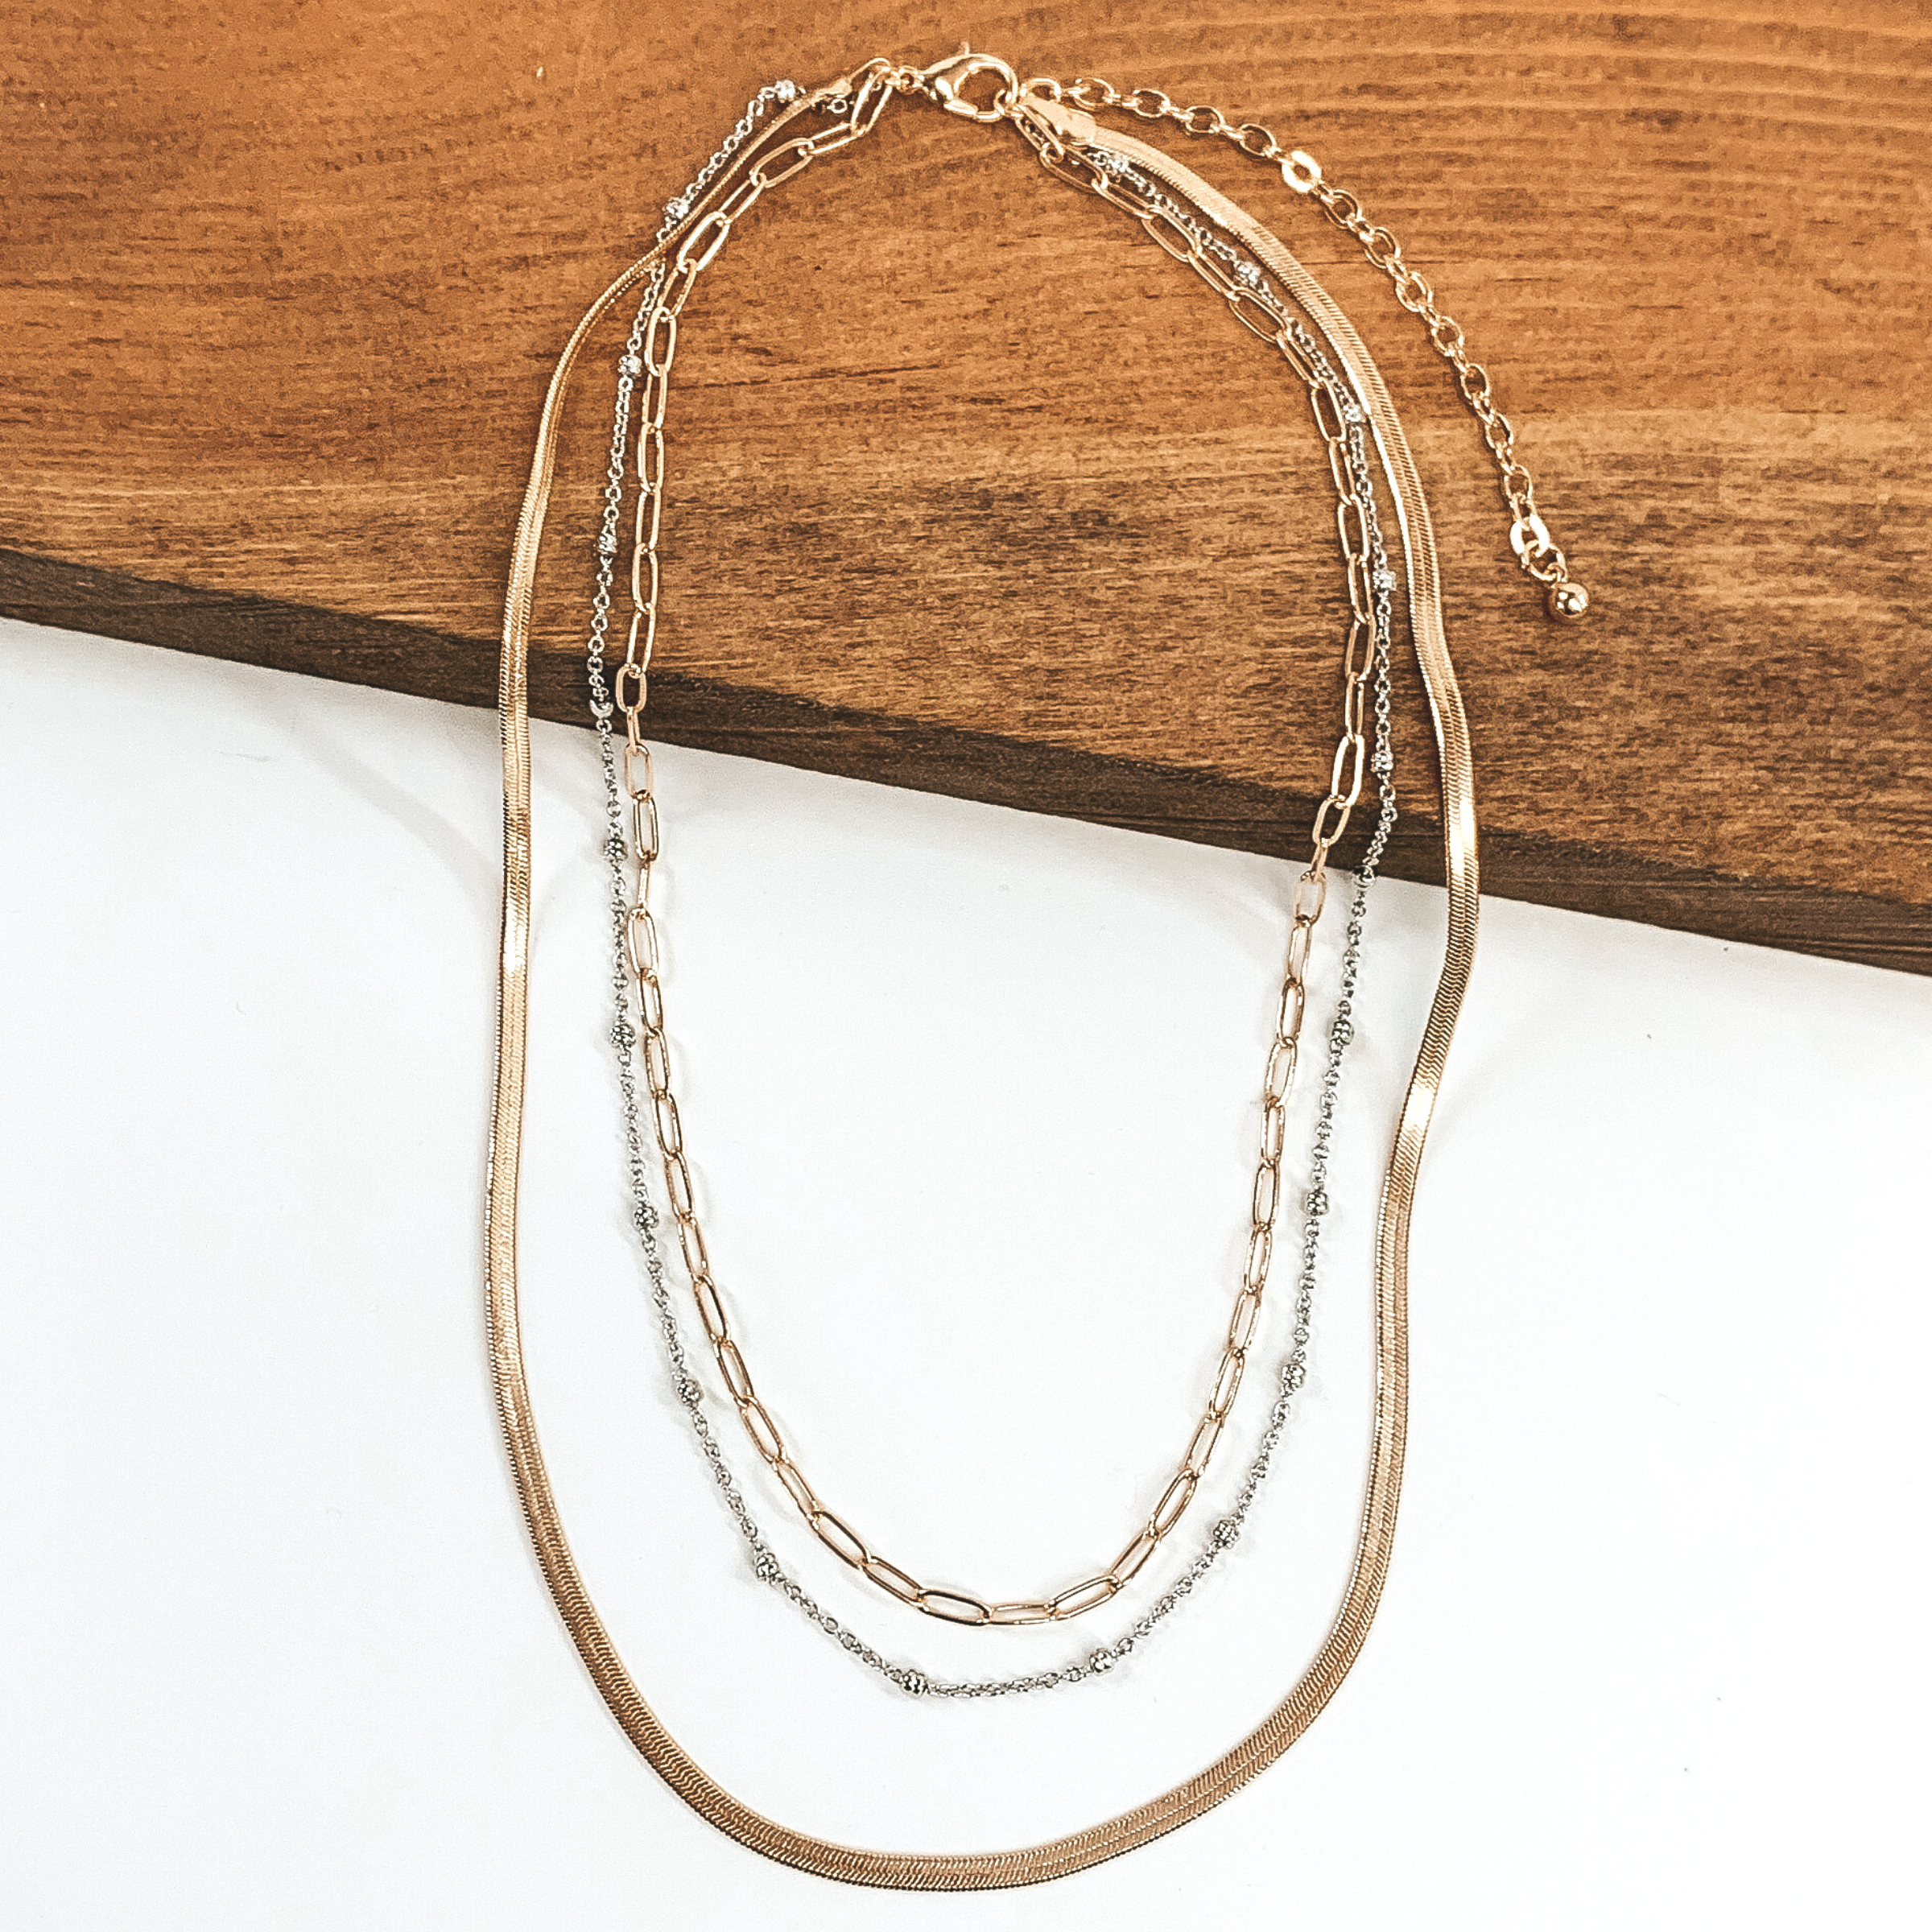 Multi Strand Chain Necklace in Gold/Silver - Giddy Up Glamour Boutique